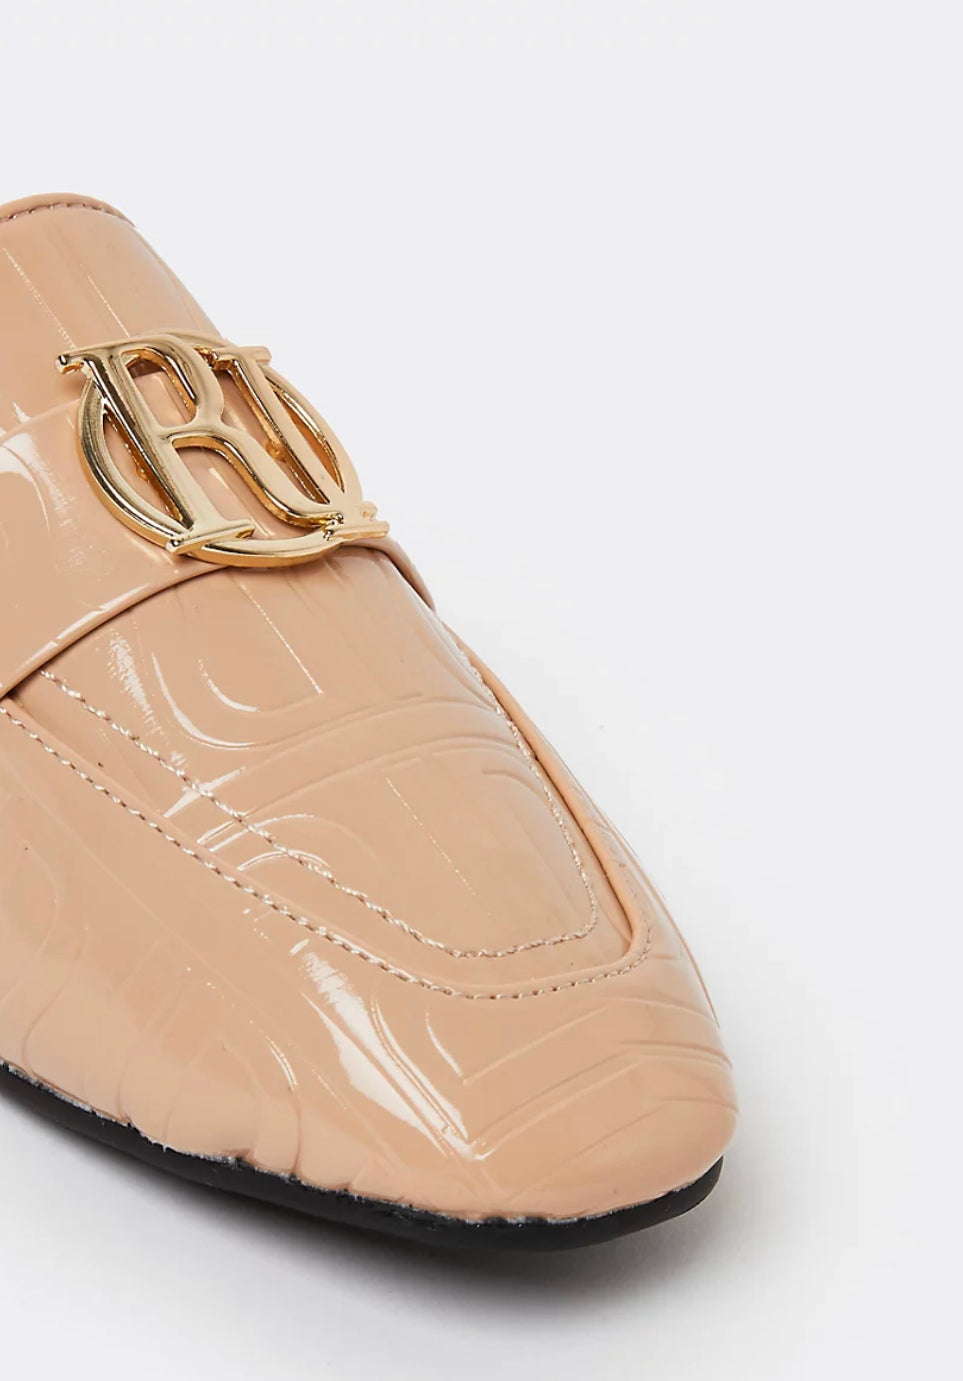 RIVER ISLAND NUDE PATENT LOAFERS